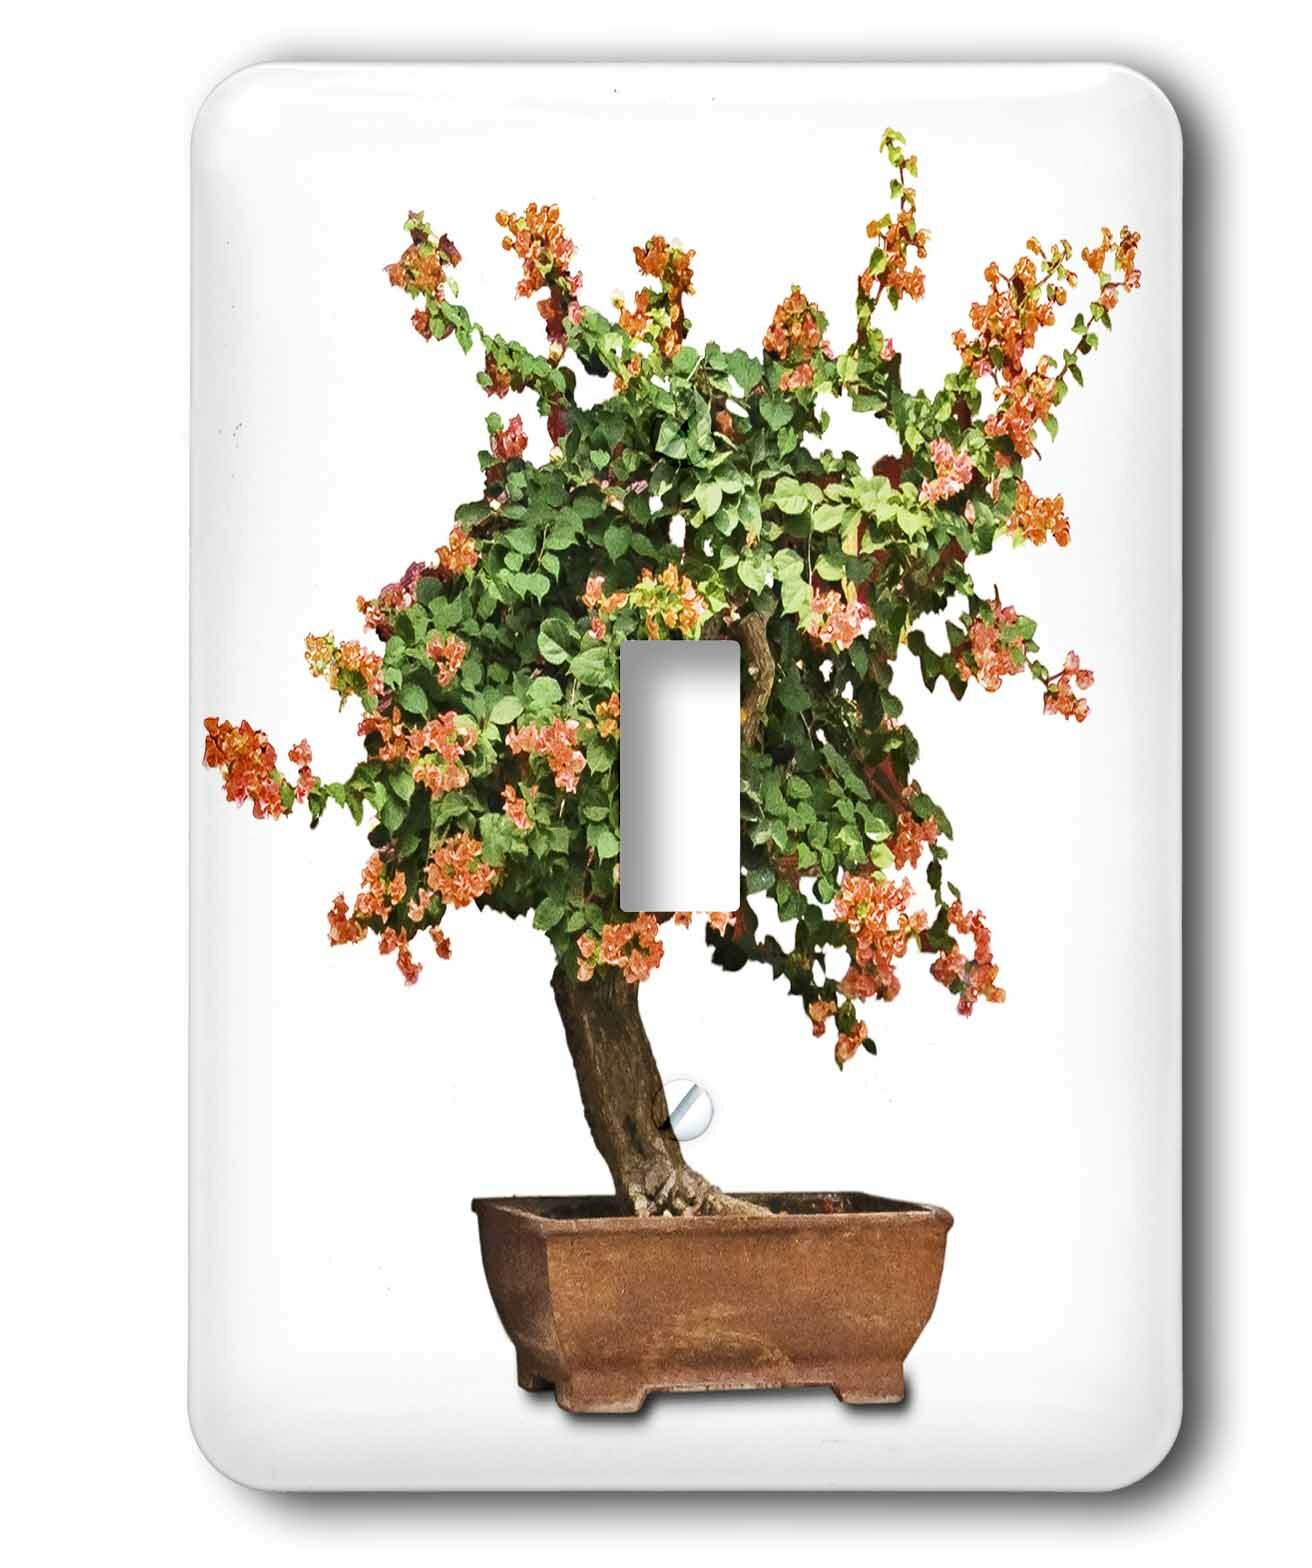 3dRose Lsp_13926_1 Penjing Bonsai with Orange Flowers Single Toggle Switch 